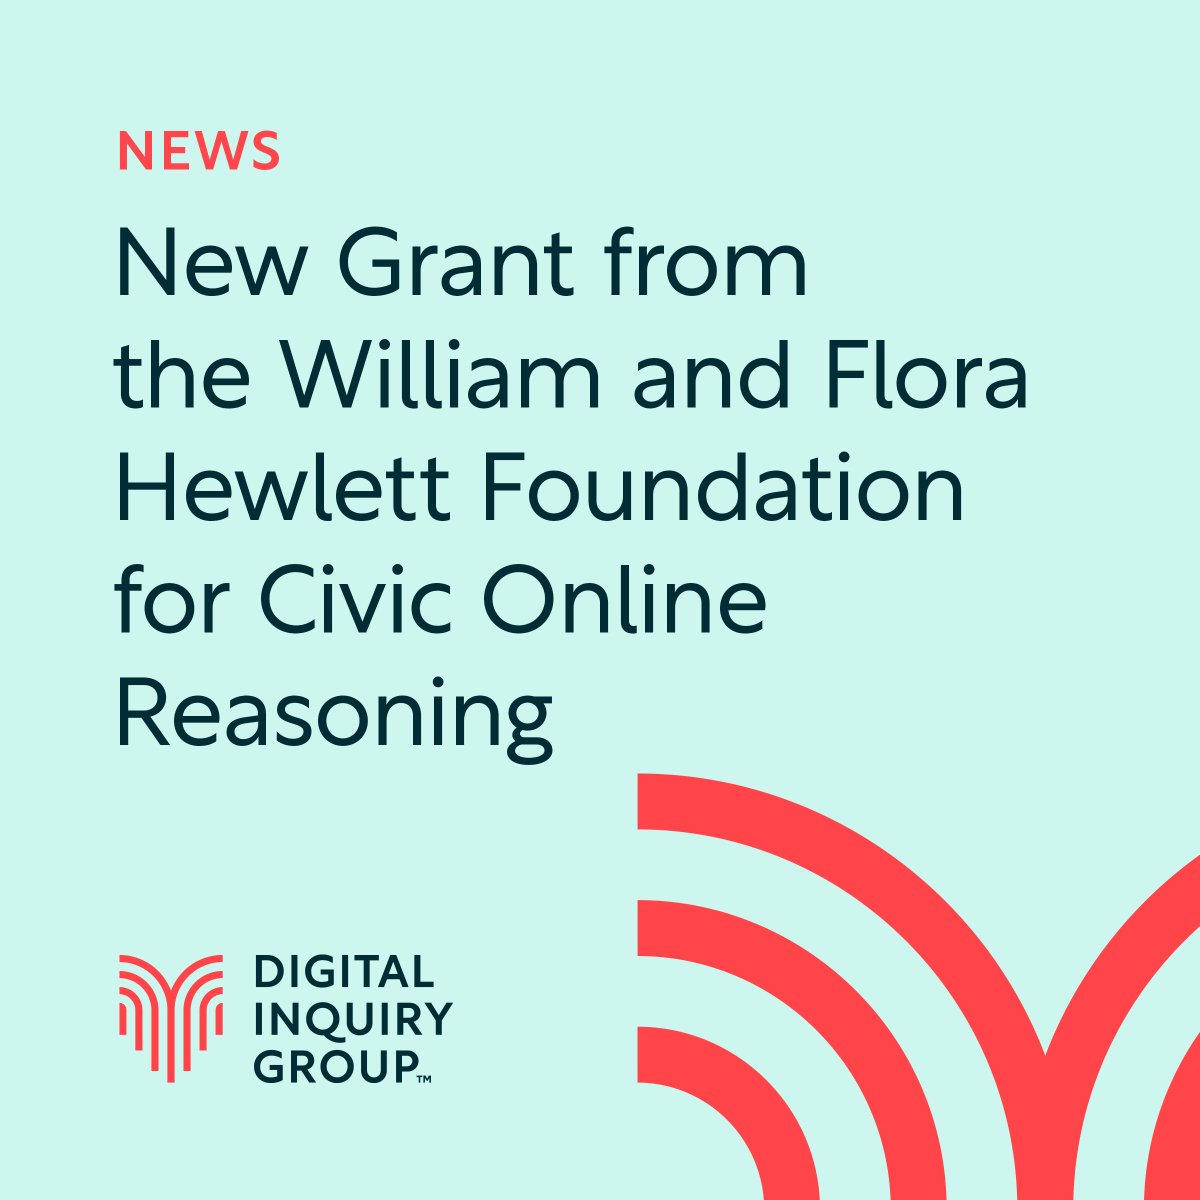 As part of a project funded by the William and Flora Hewlett Foundation, we're collaborating with educators to develop subject-specific digital literacy curriculum materials for use in secondary and post-secondary classrooms. Learn more about our projects. inquirygroup.org/projects